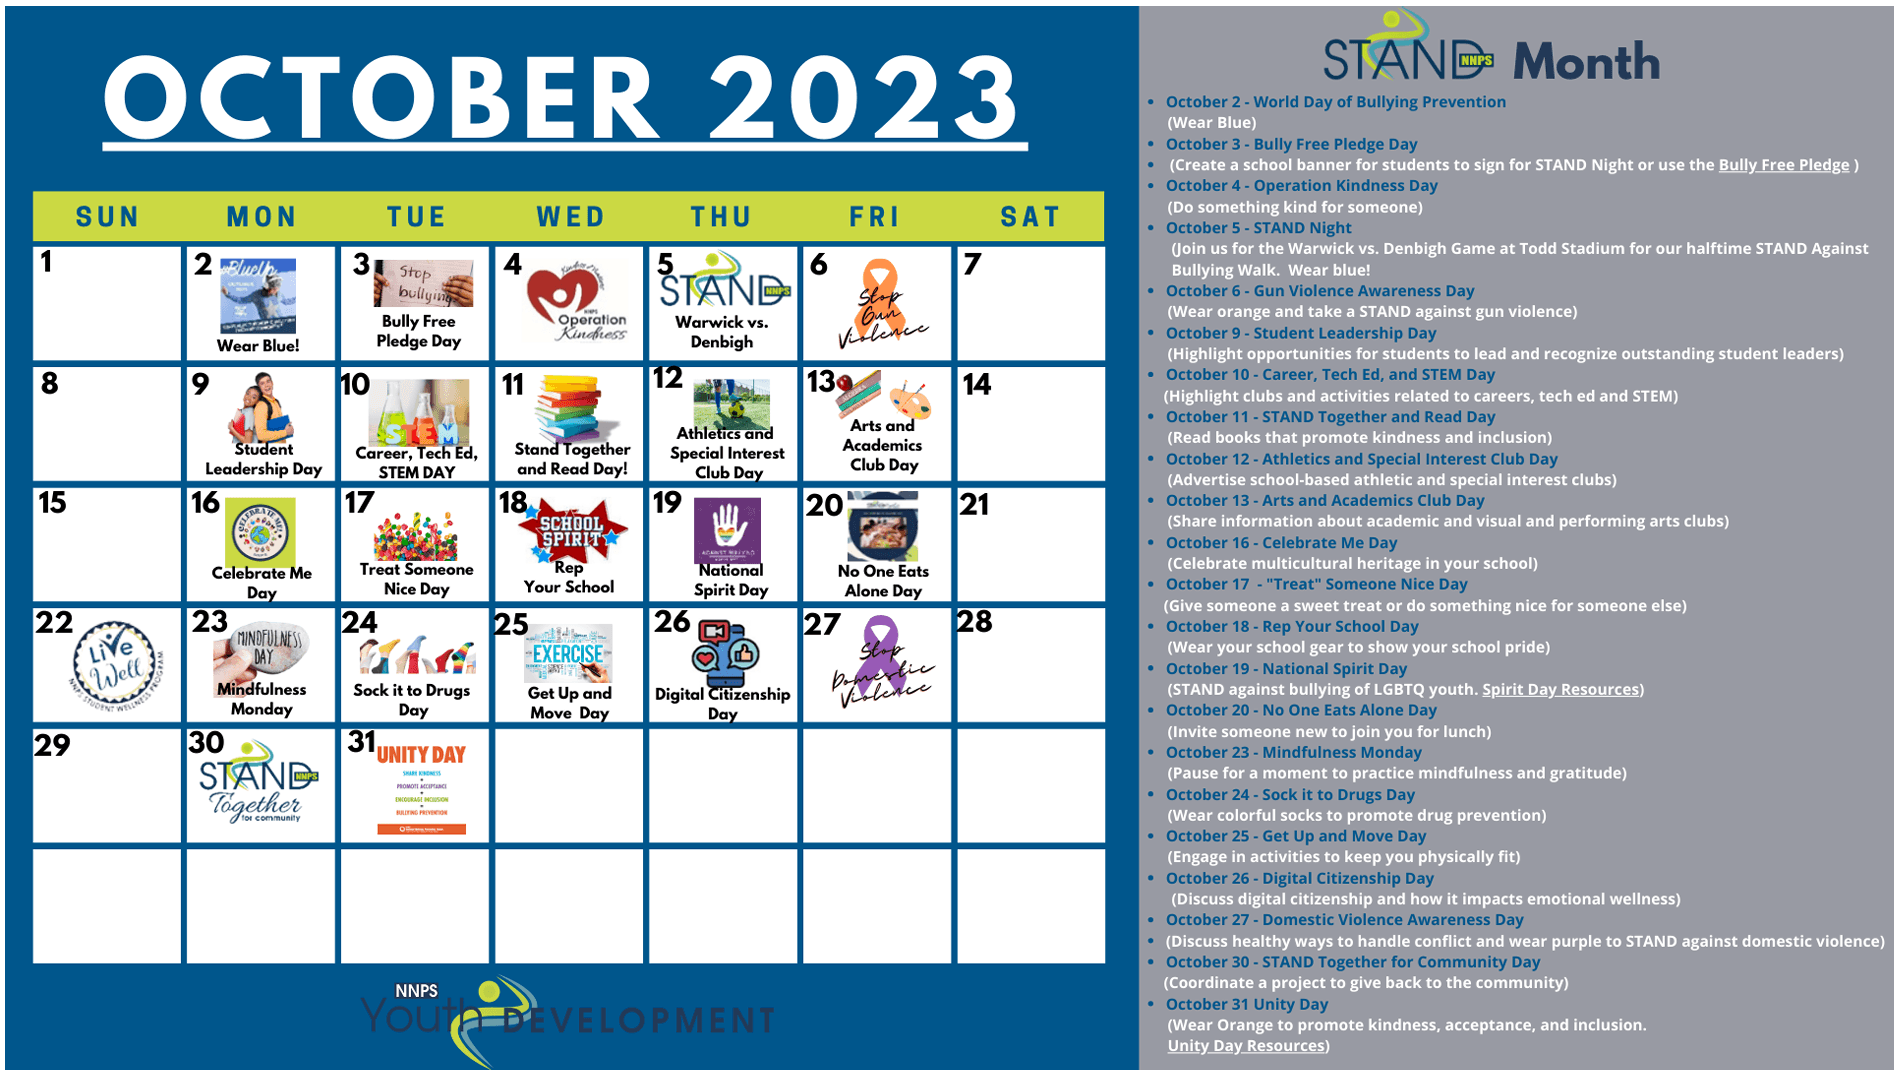 STAND Calendar, click image to enlarge